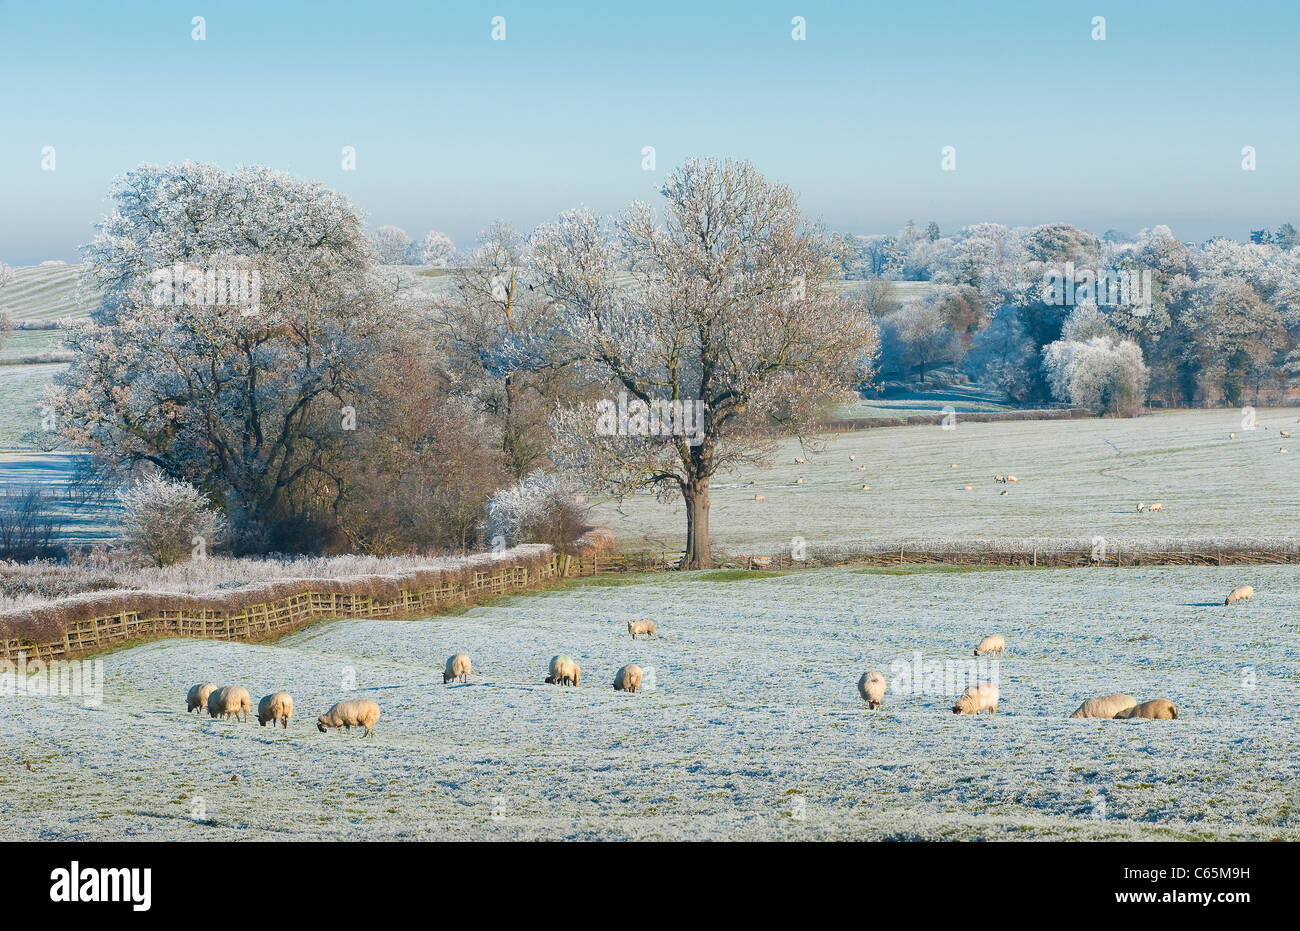 Sheep grazing in a hoar frost covered field in rural England during Winter. Stock Photo